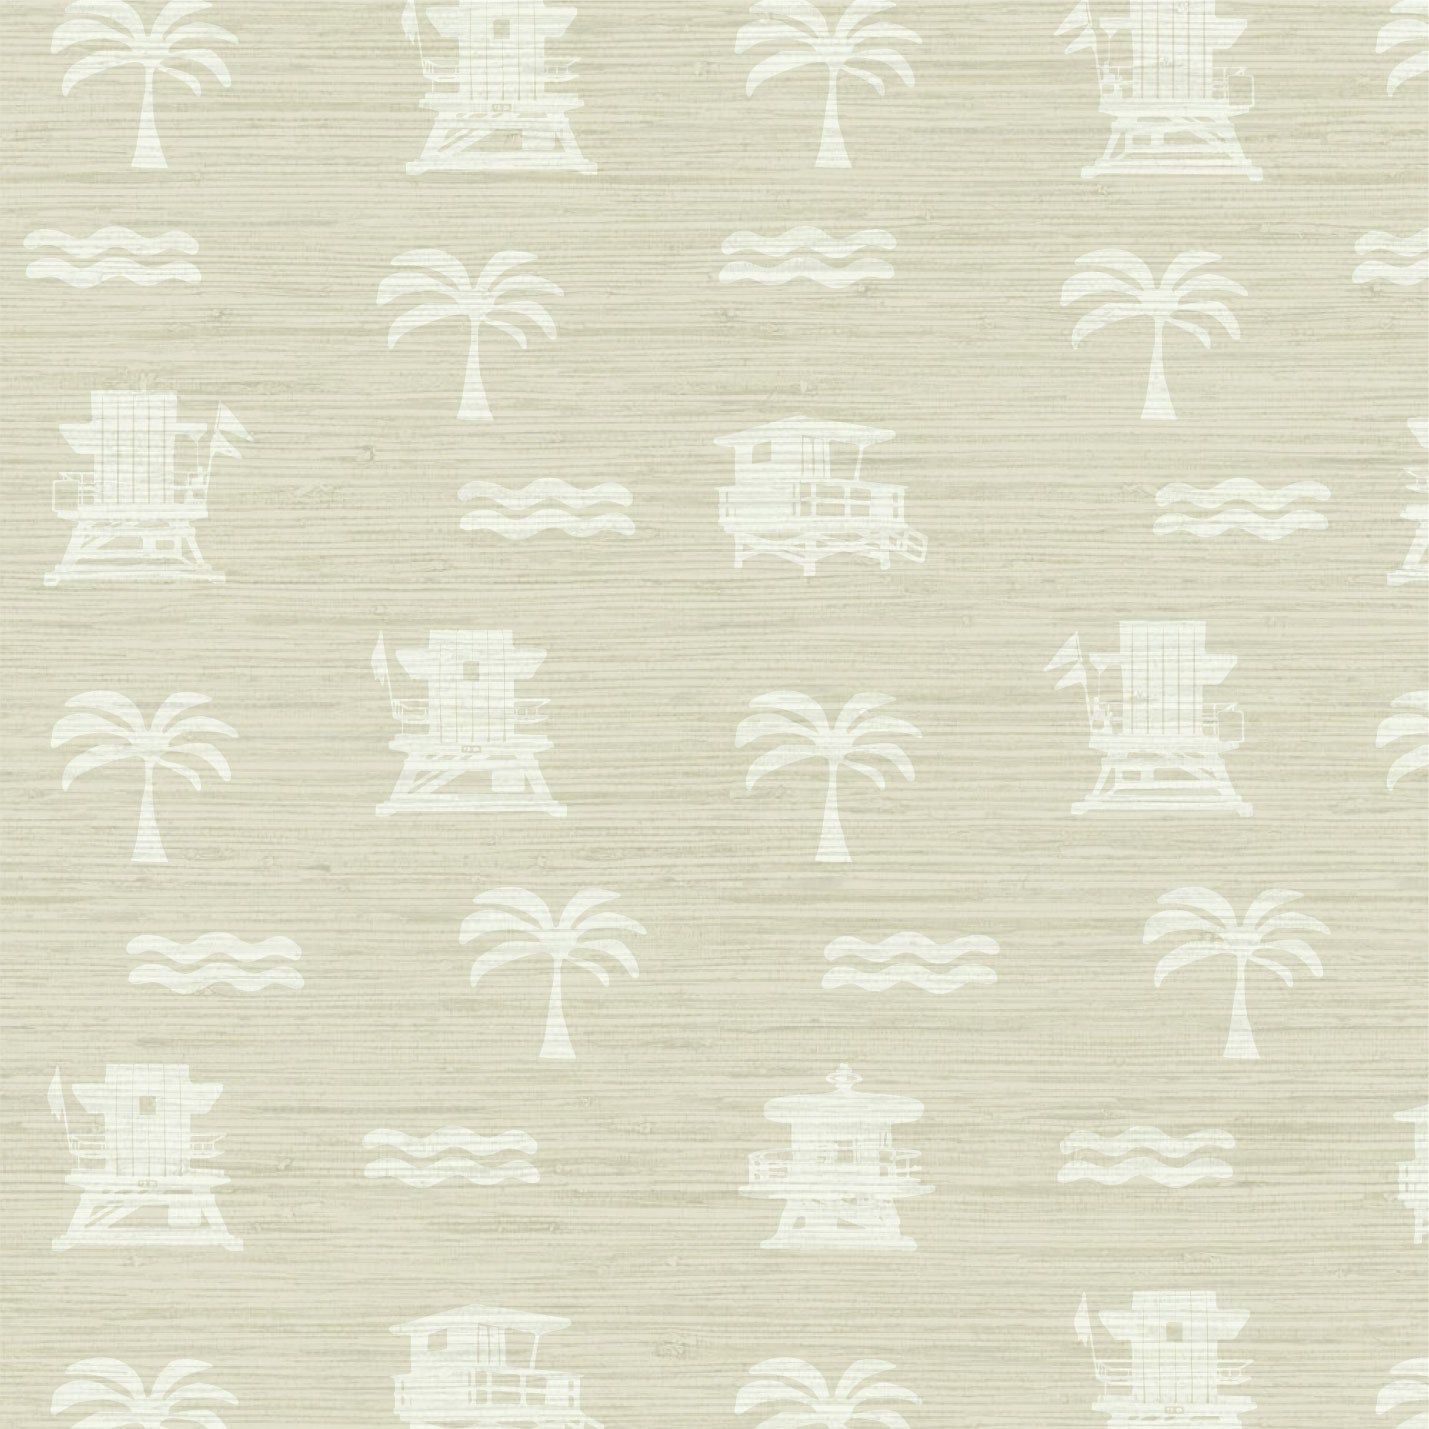 Grasscloth Natural Textured Eco-Friendly Non-toxic High-quality Sustainable practices Sustainability Interior Design Wall covering wallpaper grid seaside coastal seashore waterfront vacation home styling retreat relaxed beach vibes beach cottage shoreline oceanfront nautical tropical ocean waves palm tree lifeguard stand mini print custom interior design beach house white tan sand cream off-white